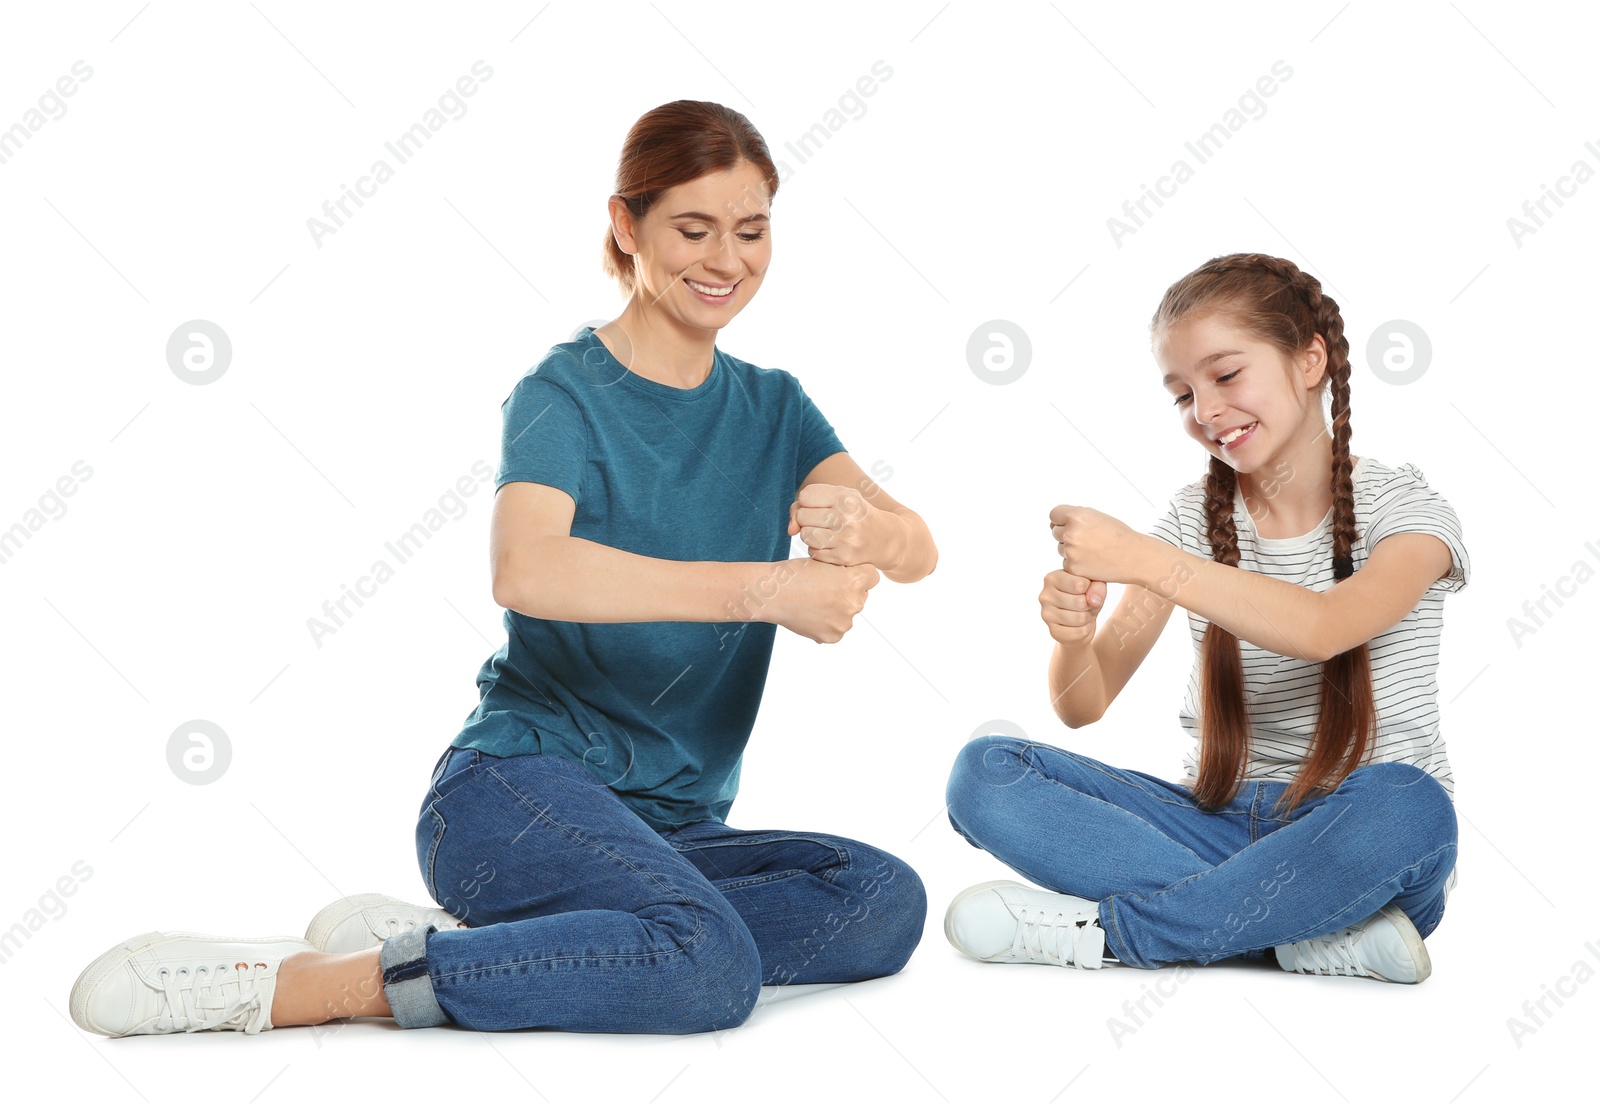 Photo of Hearing impaired mother and her child talking with help of sign language on white background